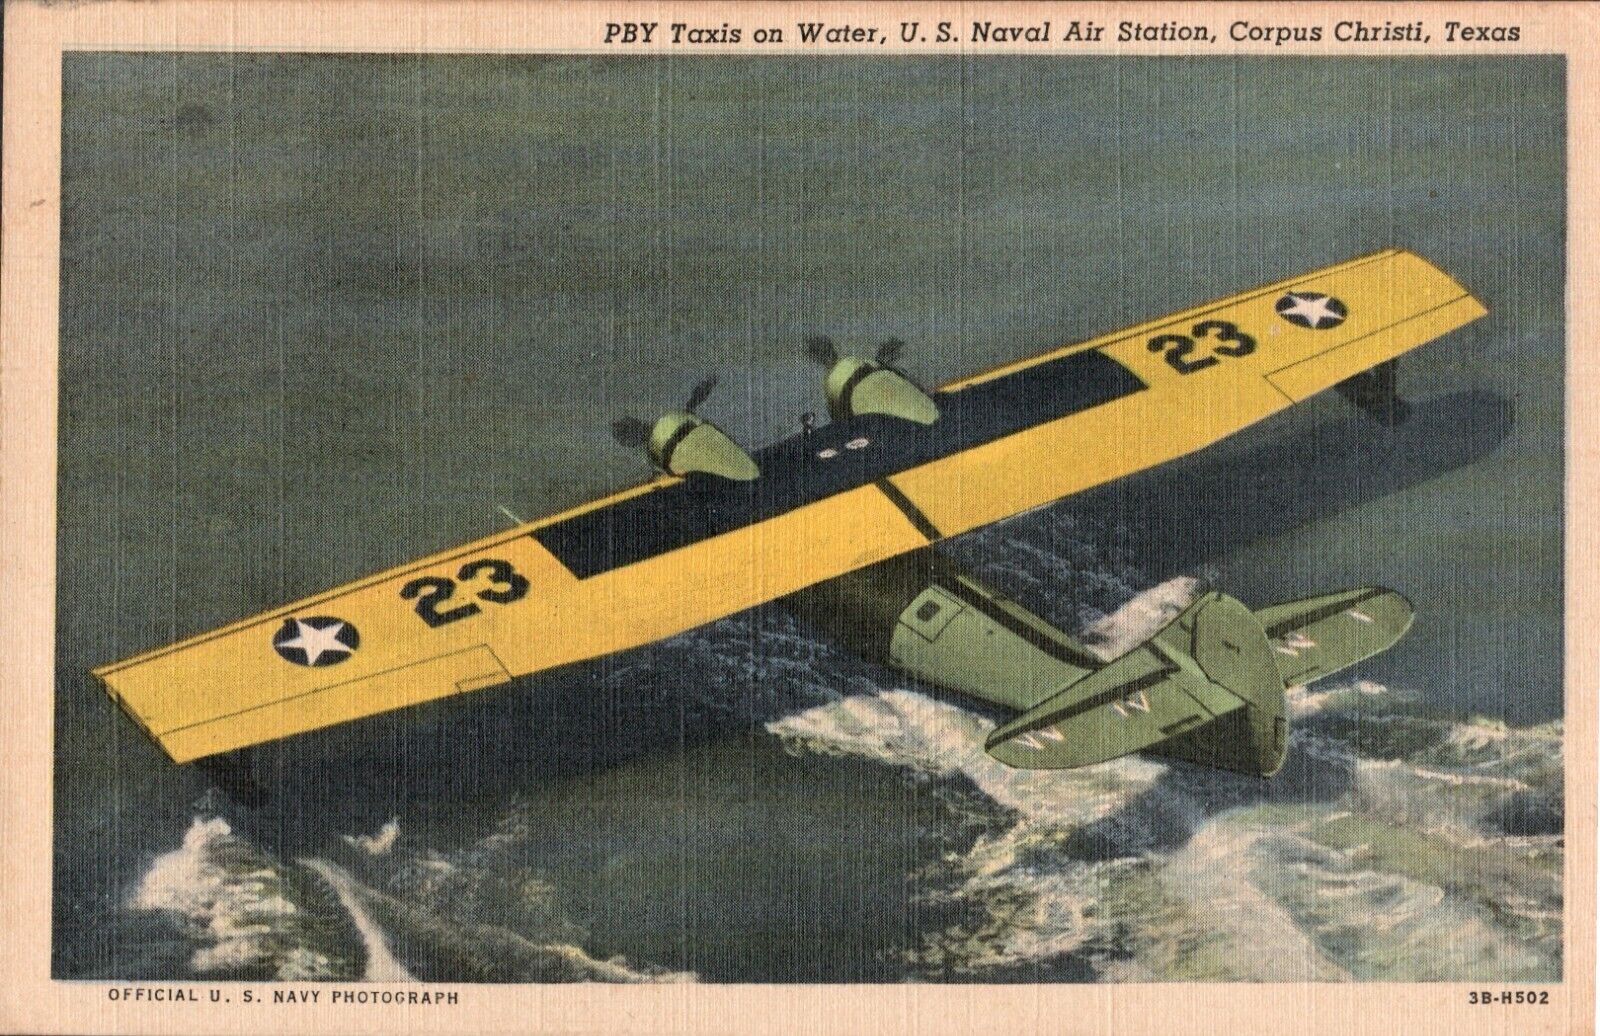 Posted VTG Linen PBY Taxis on Water U.S. Naval Air Station Corpus Christi TX